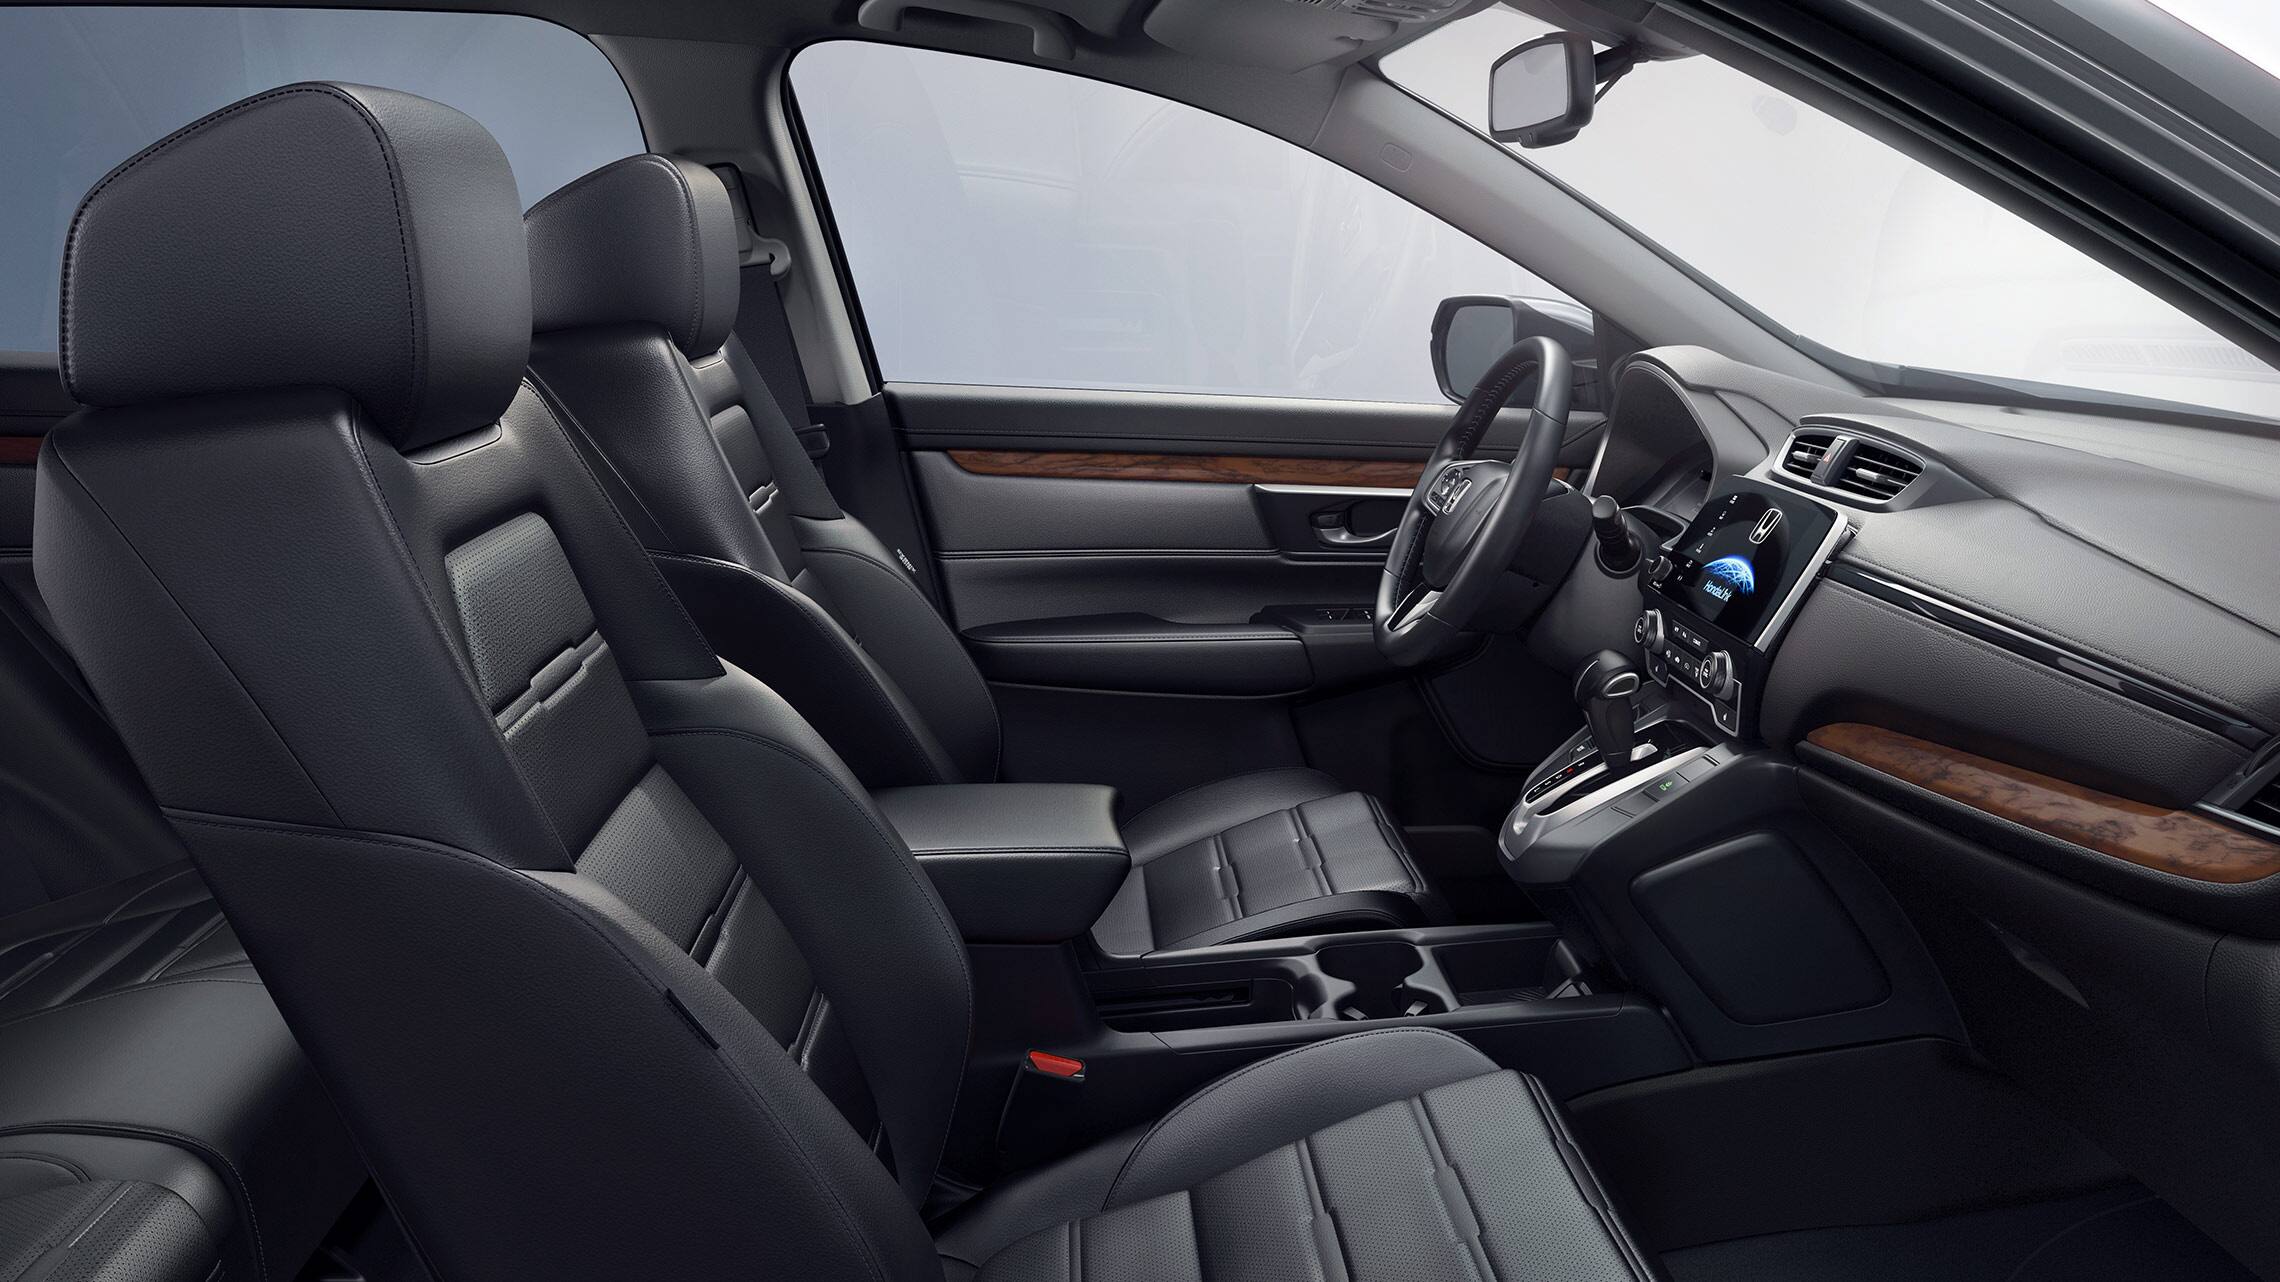 2019 Honda CR-V Touring with leather-trimmed interior.